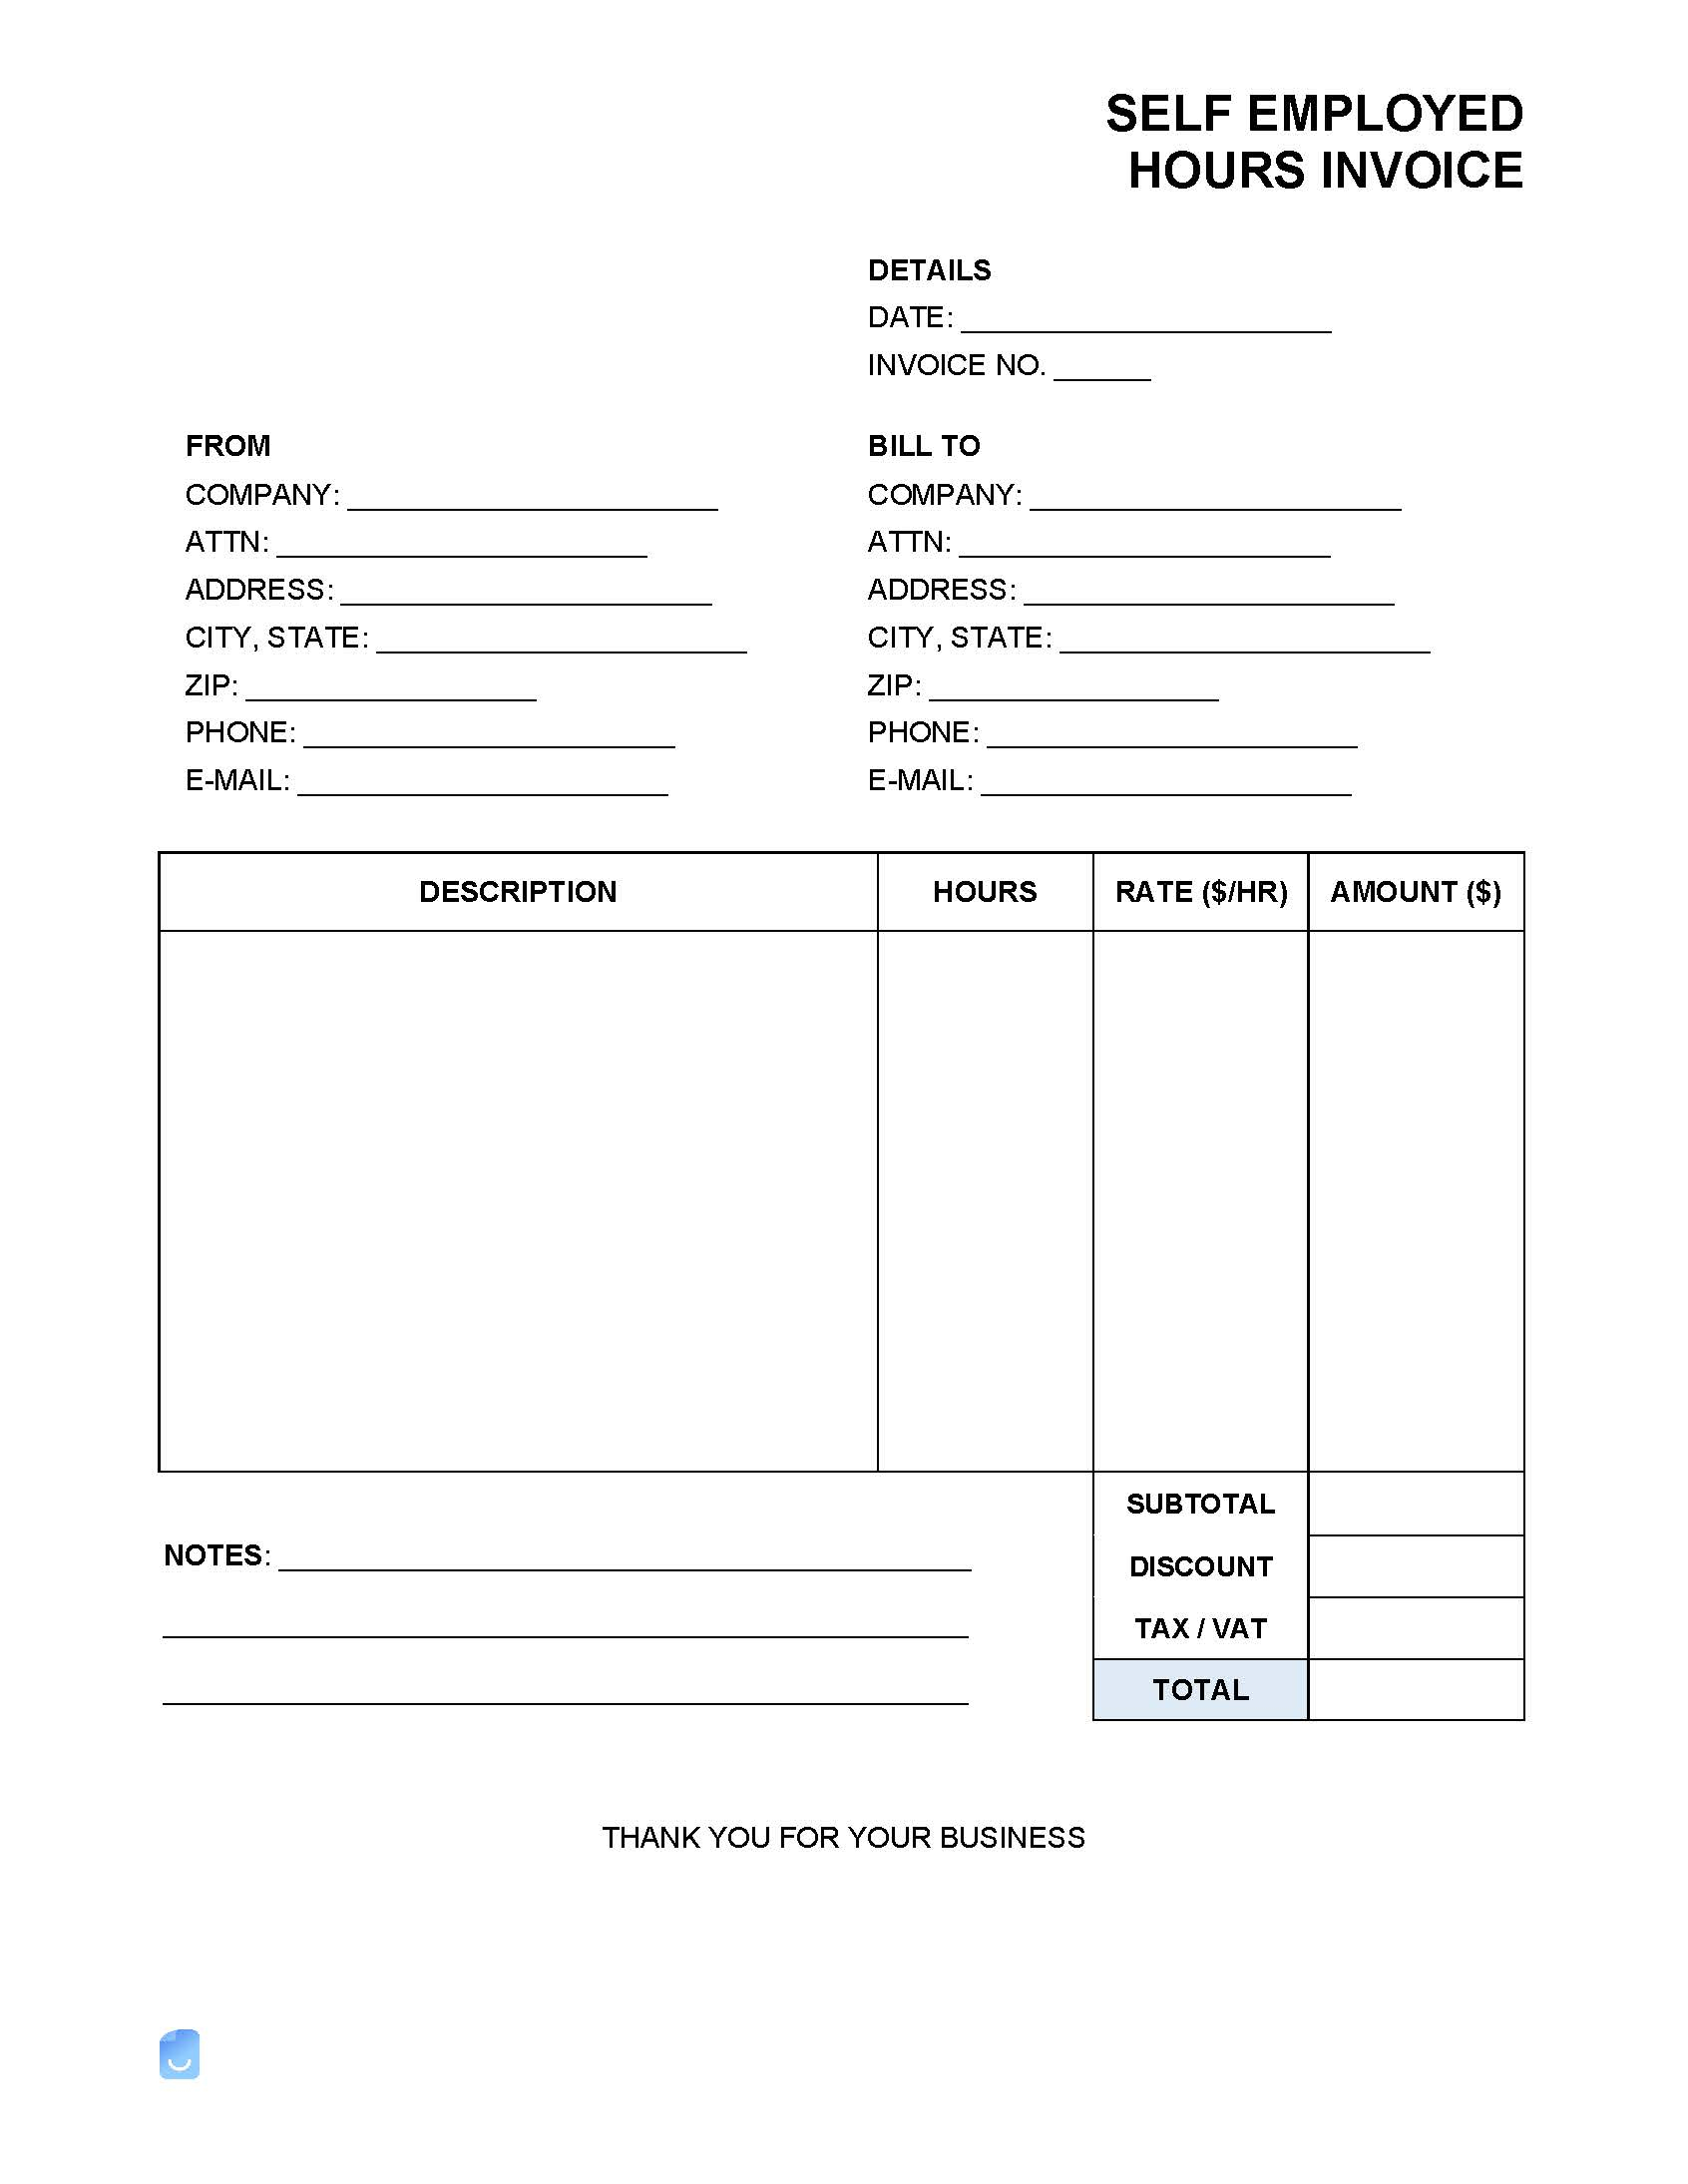 Self Employed Hours Invoice Template | Invoice Maker For Invoice For Self Employed Template